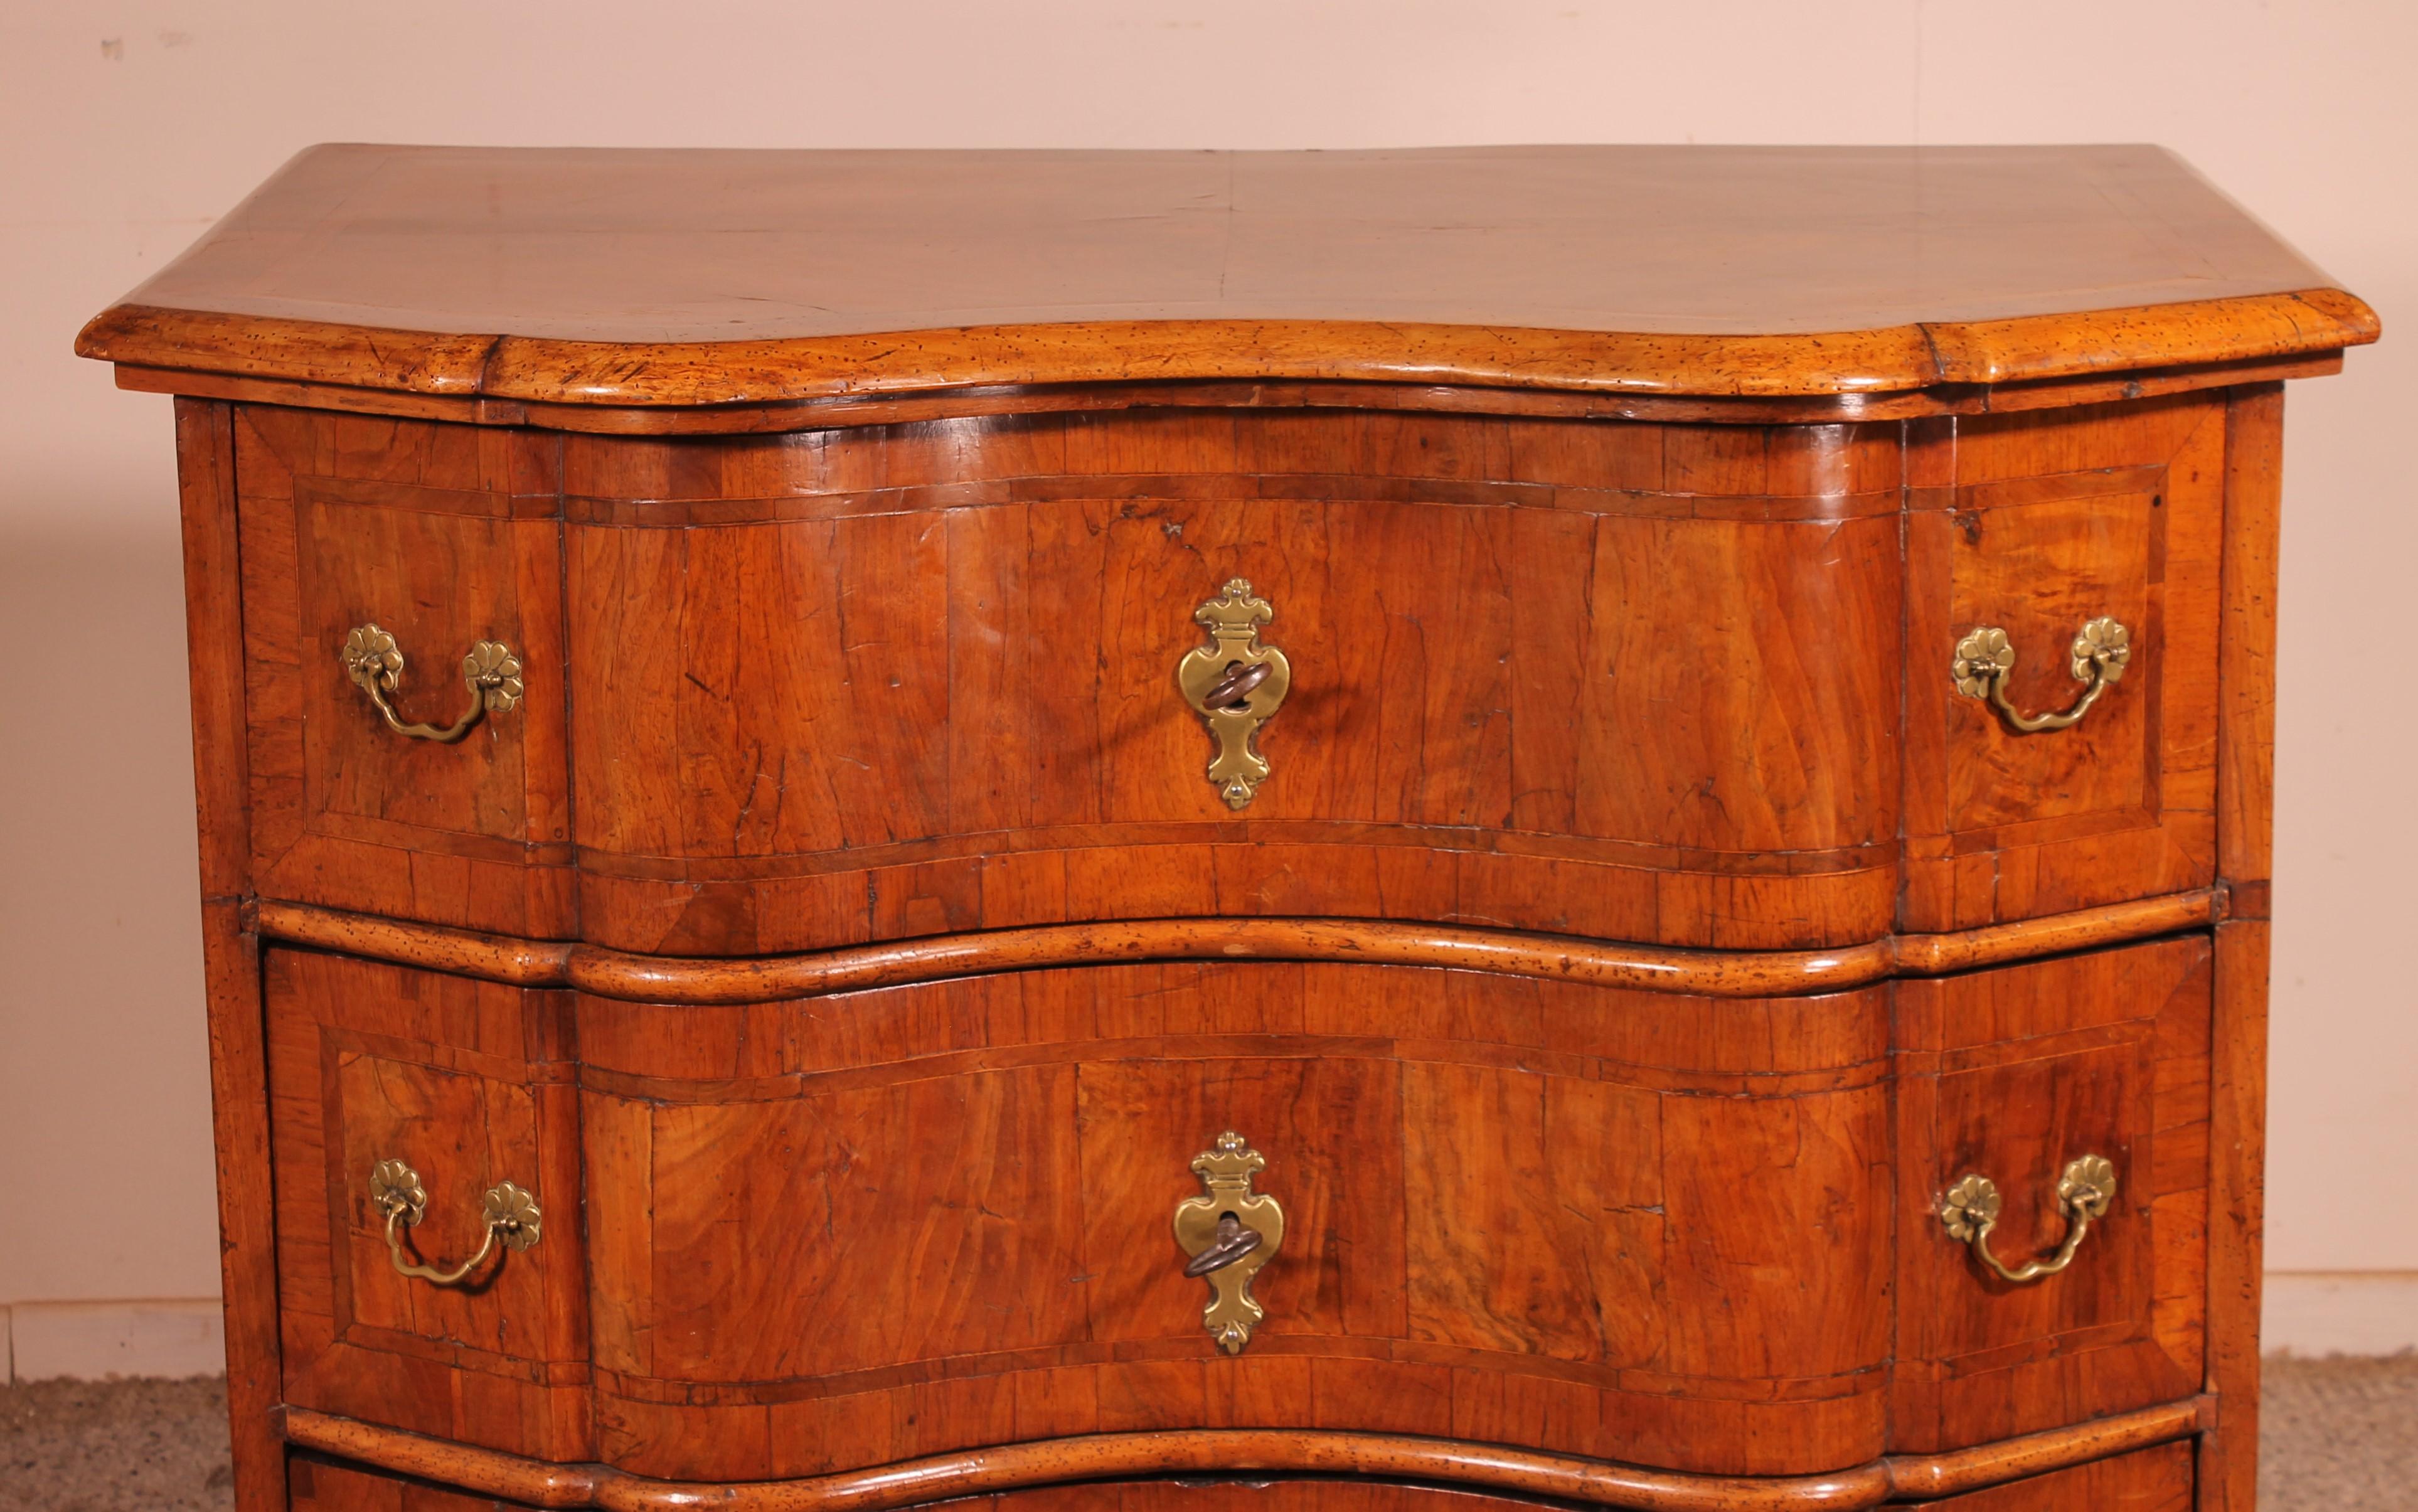 Louis XIV walnut chest of drawers from the North of Italy from the end of the 17th century-beginning of the 18th century

Very beautiful molding movements
Superb quality

It has its original locks and handles
in perfect condition and superb